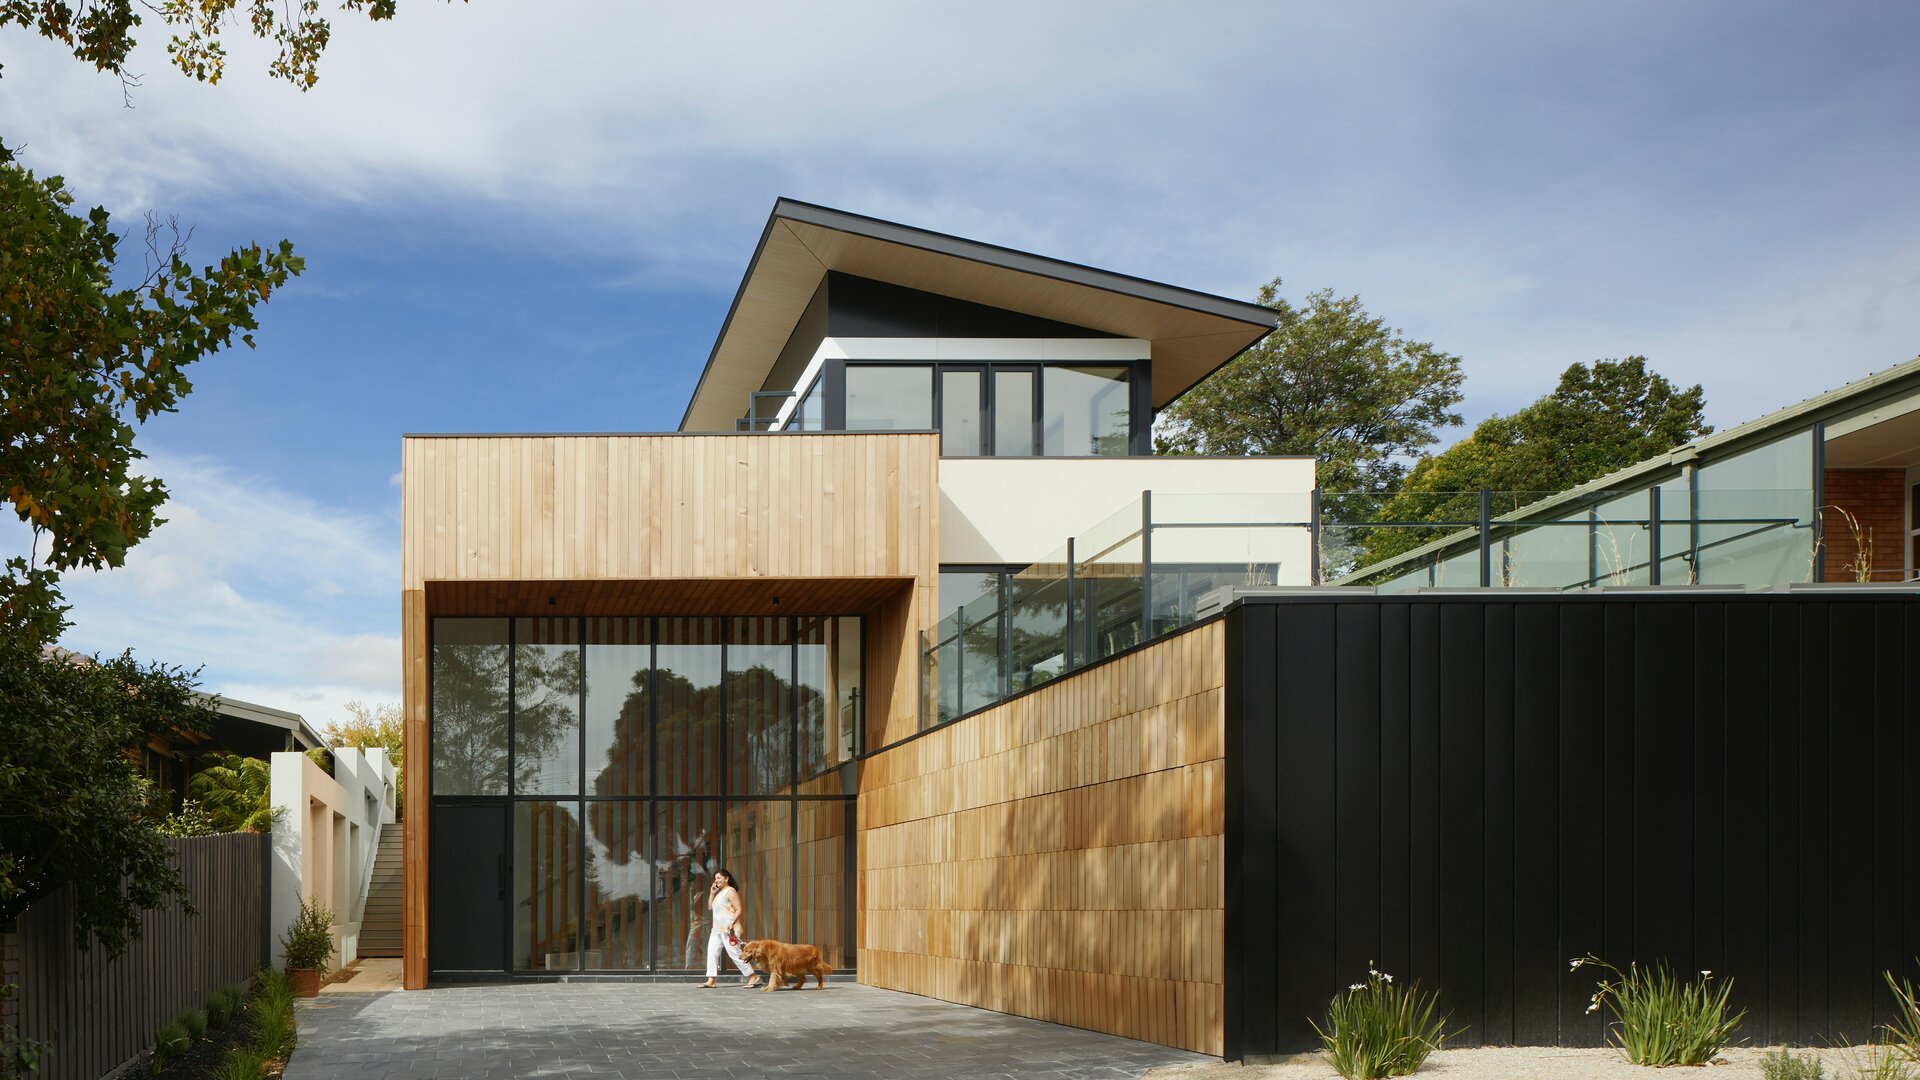 Exterior view of a modern house with structural connections in a black and light wood look, as well as glass elements.